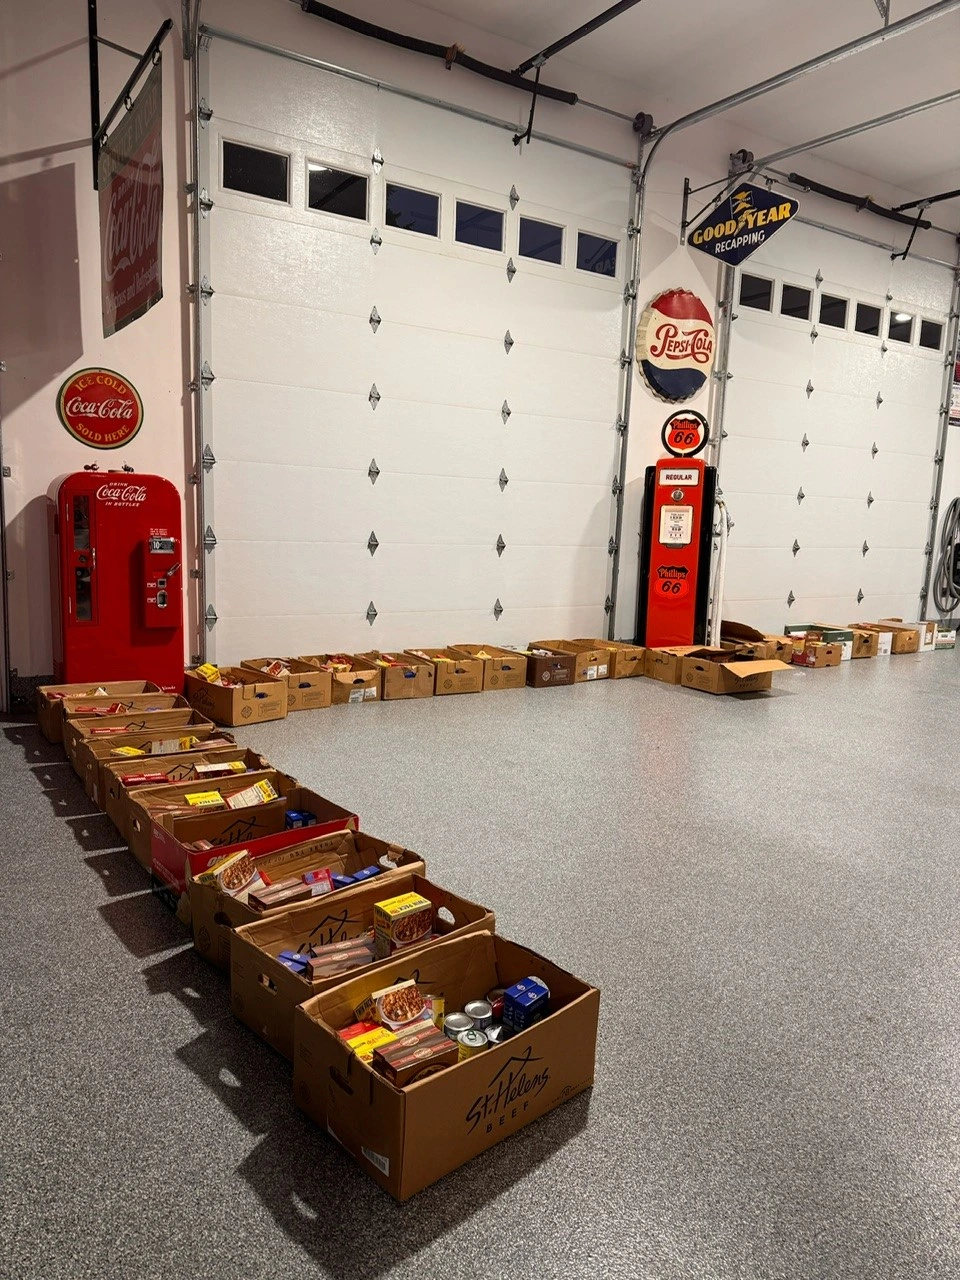 Food collected by the S&S Roofing for the Maryville Elementary School Christmas Food Drive 